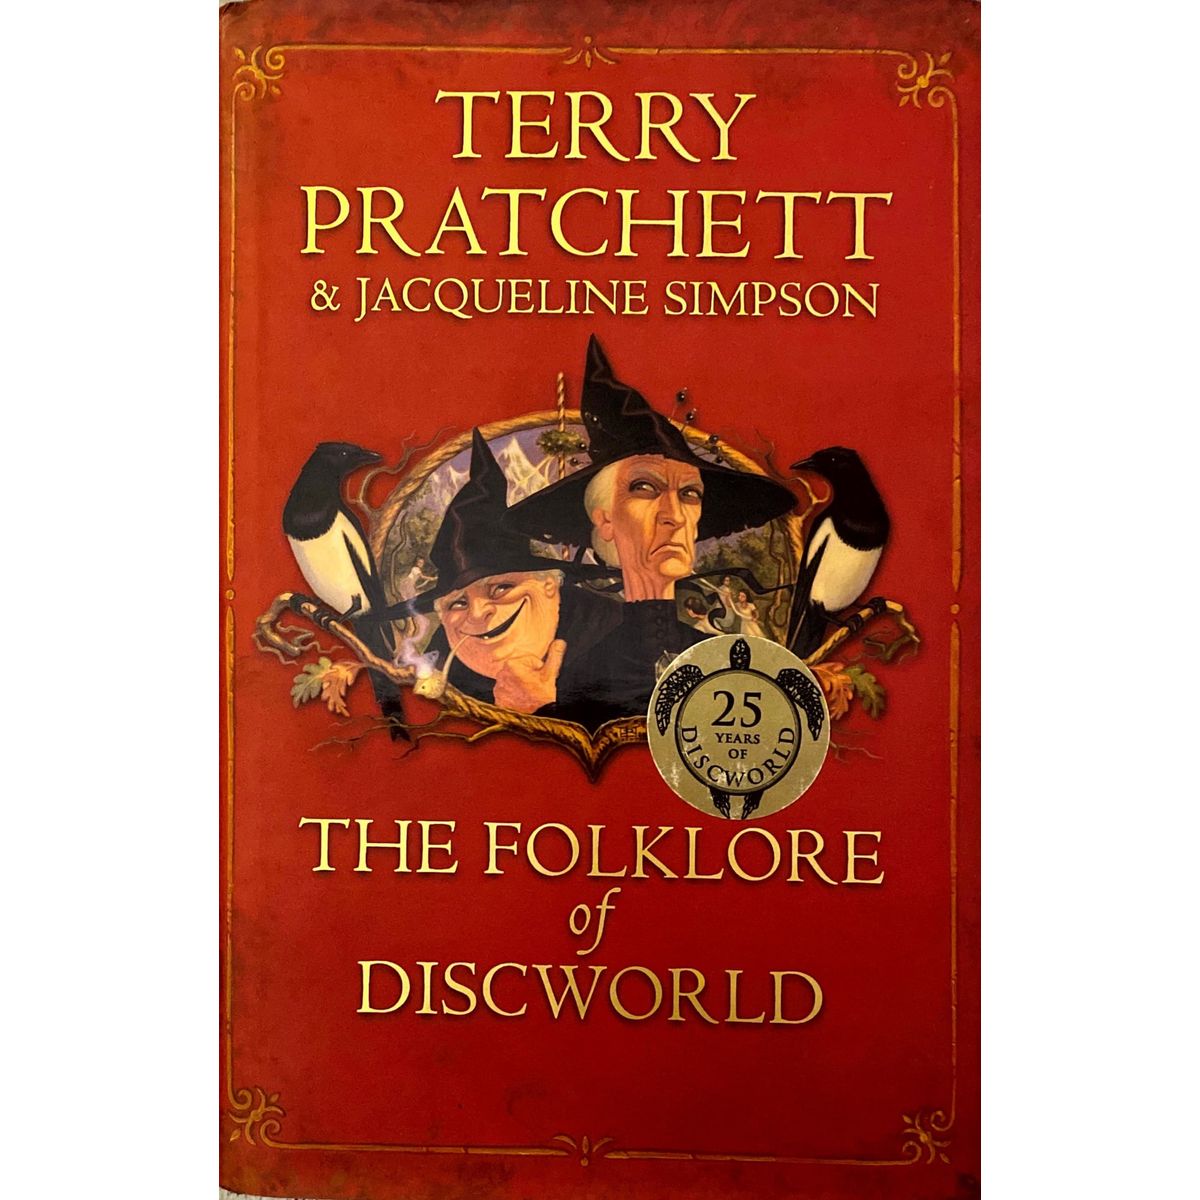 ISBN: 9780385611008 / 0385611005 - The Folklore of Discworld by Terry Pratchett & Jacqueline Simpson [2008]